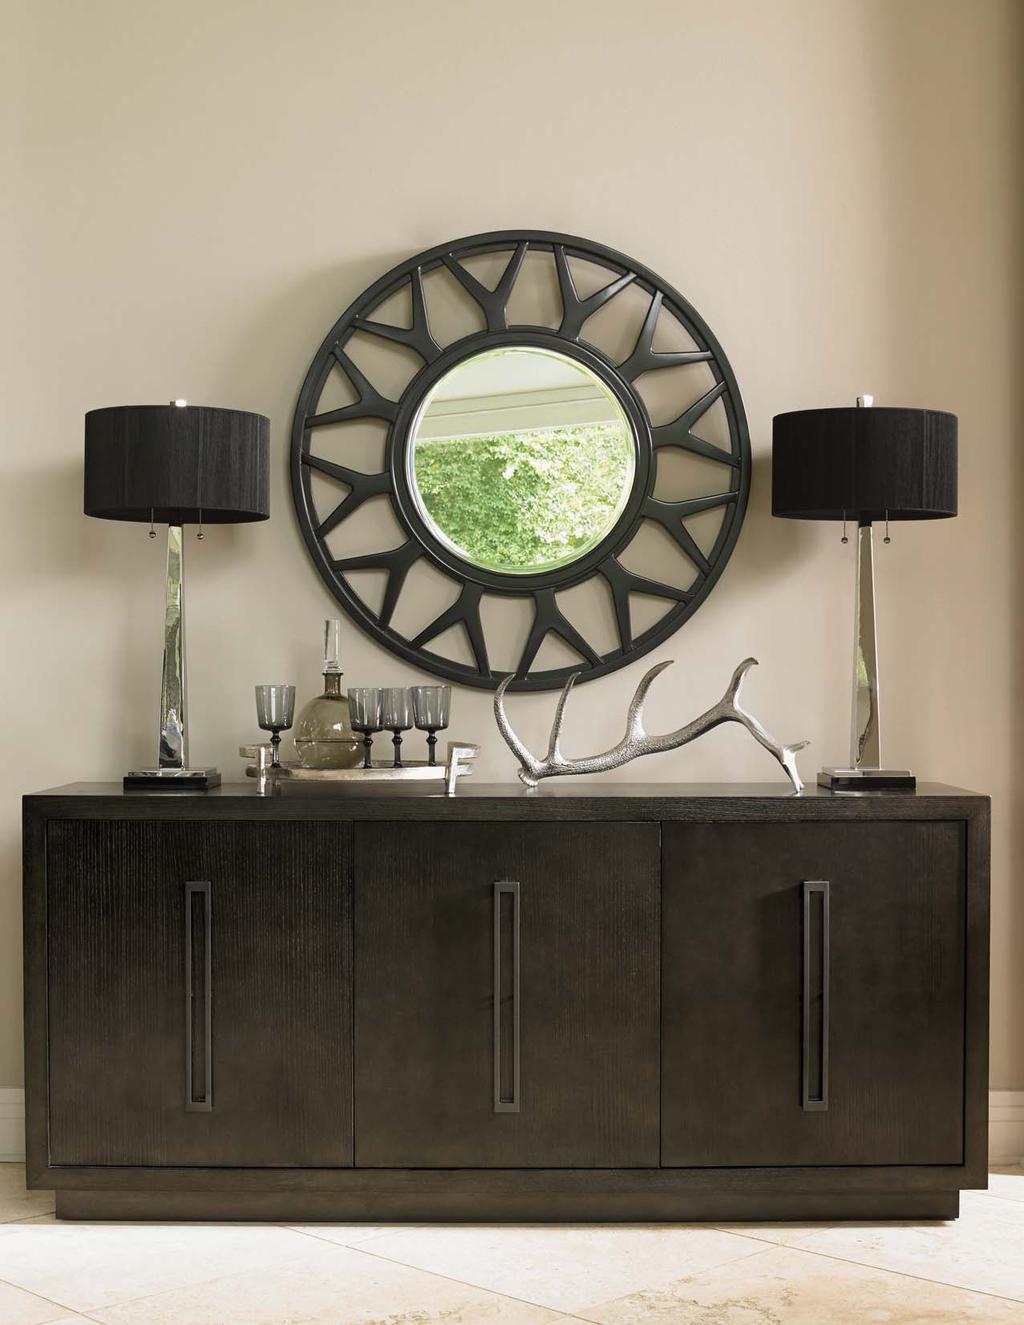 The Targa buffet is a signature piece in the collection, with striking vertical pulls on the three